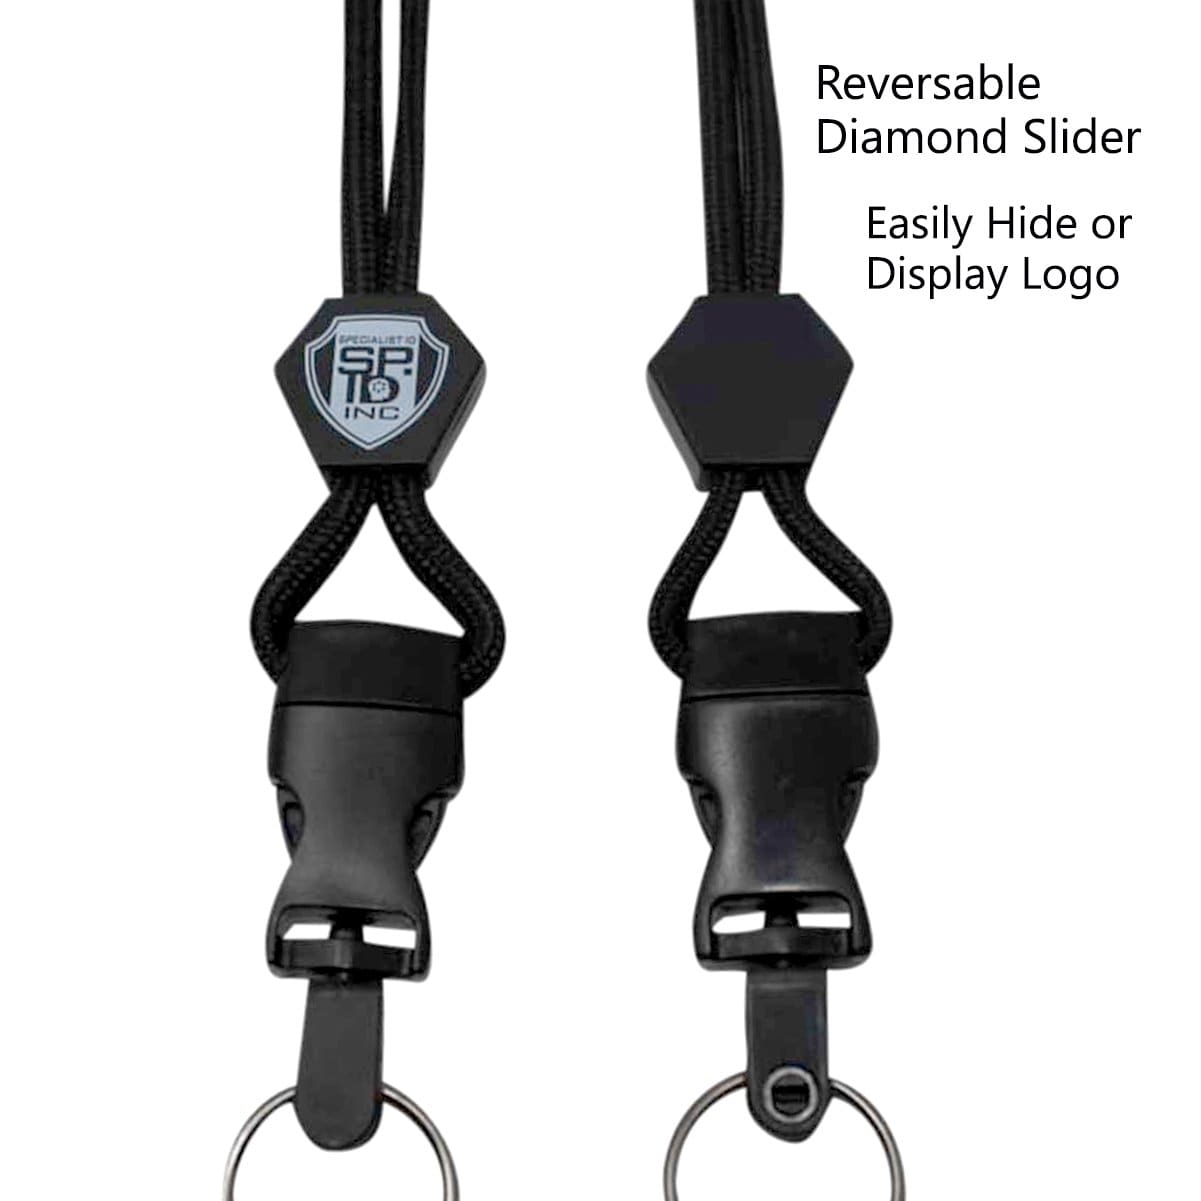 Two black Specialist ID Horizontal 3 Card Badge Holder & Heavy Duty Lanyard with Breakaway Clip and Key Ring - Hard Plastic Rigid Name Tag Protector - Top Load for Three Badges, allowing for the logo to be easily displayed or hidden. Perfect as a professional work wear accessory or badge holder.